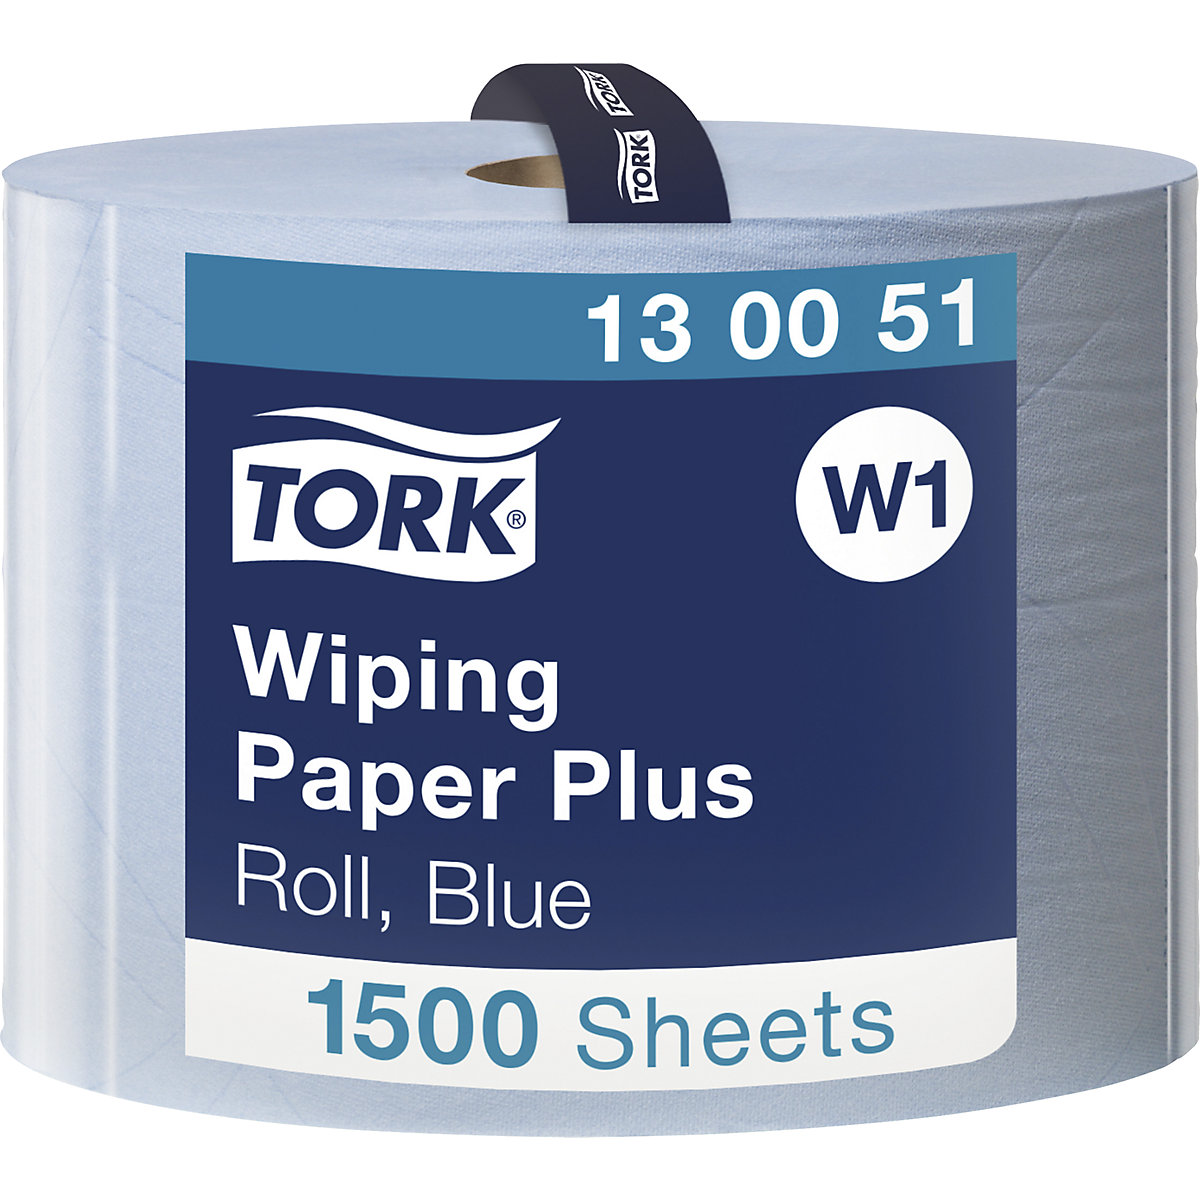 Multi-purpose paper wipes, strong - TORK